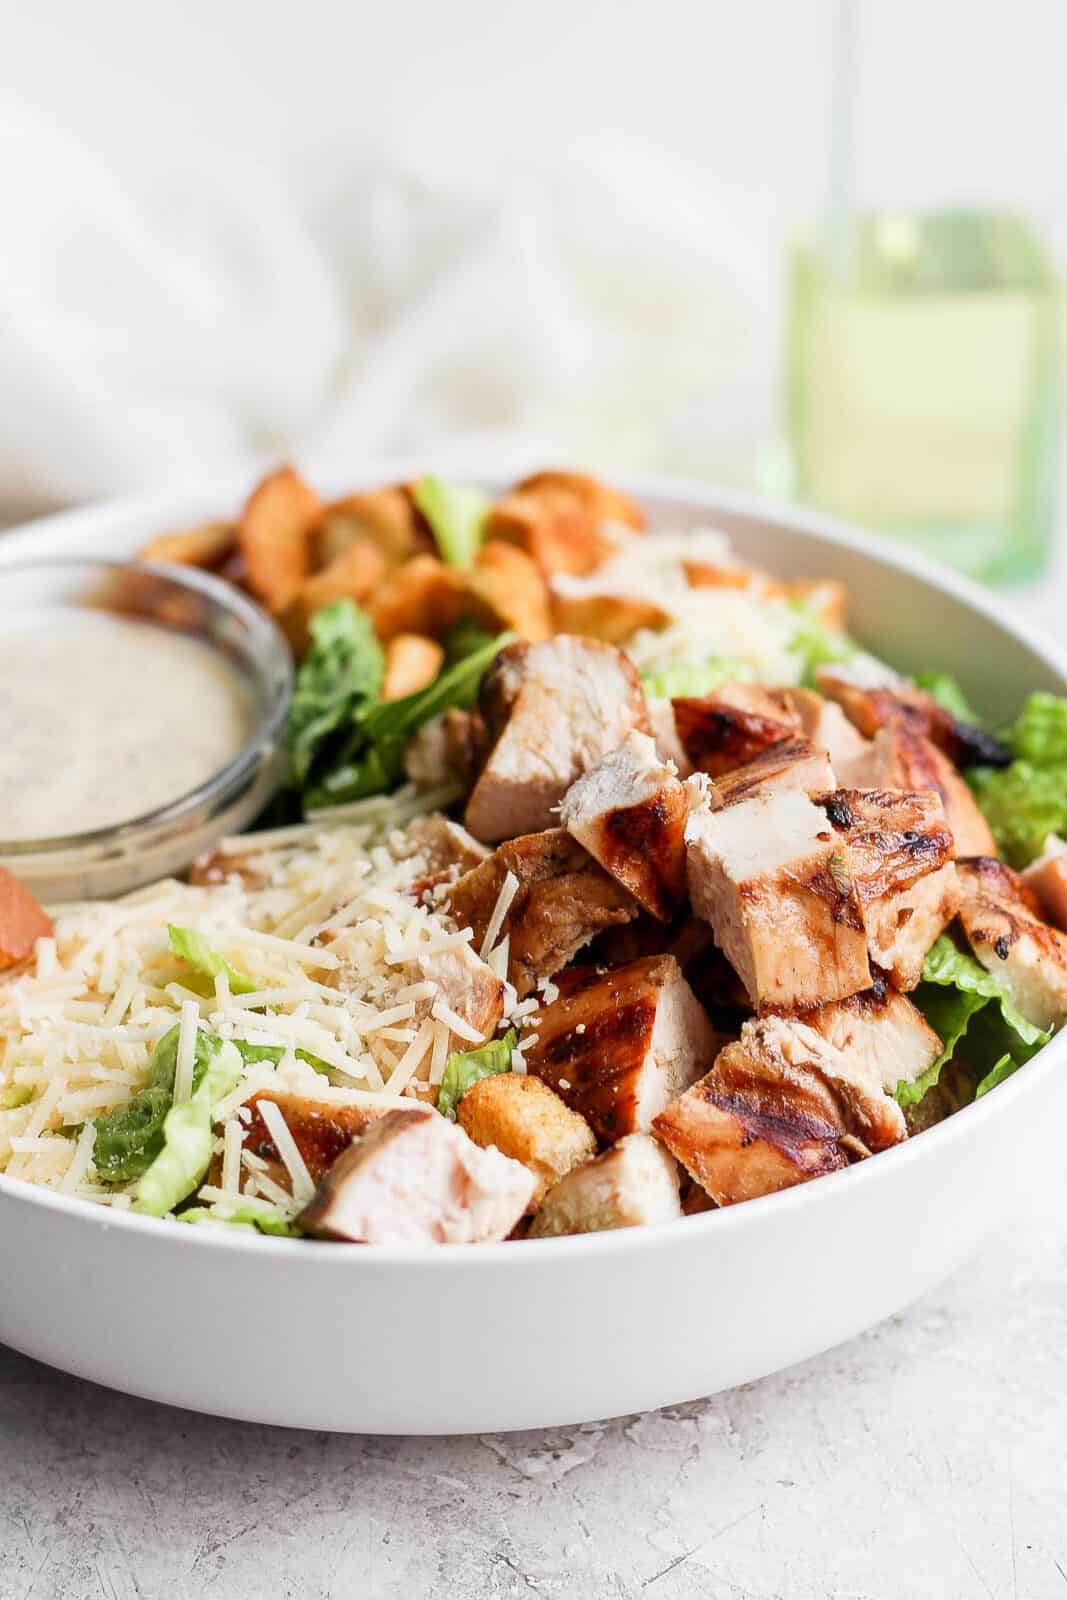 Grilled chicken caesar salad with a small dish of dressing.